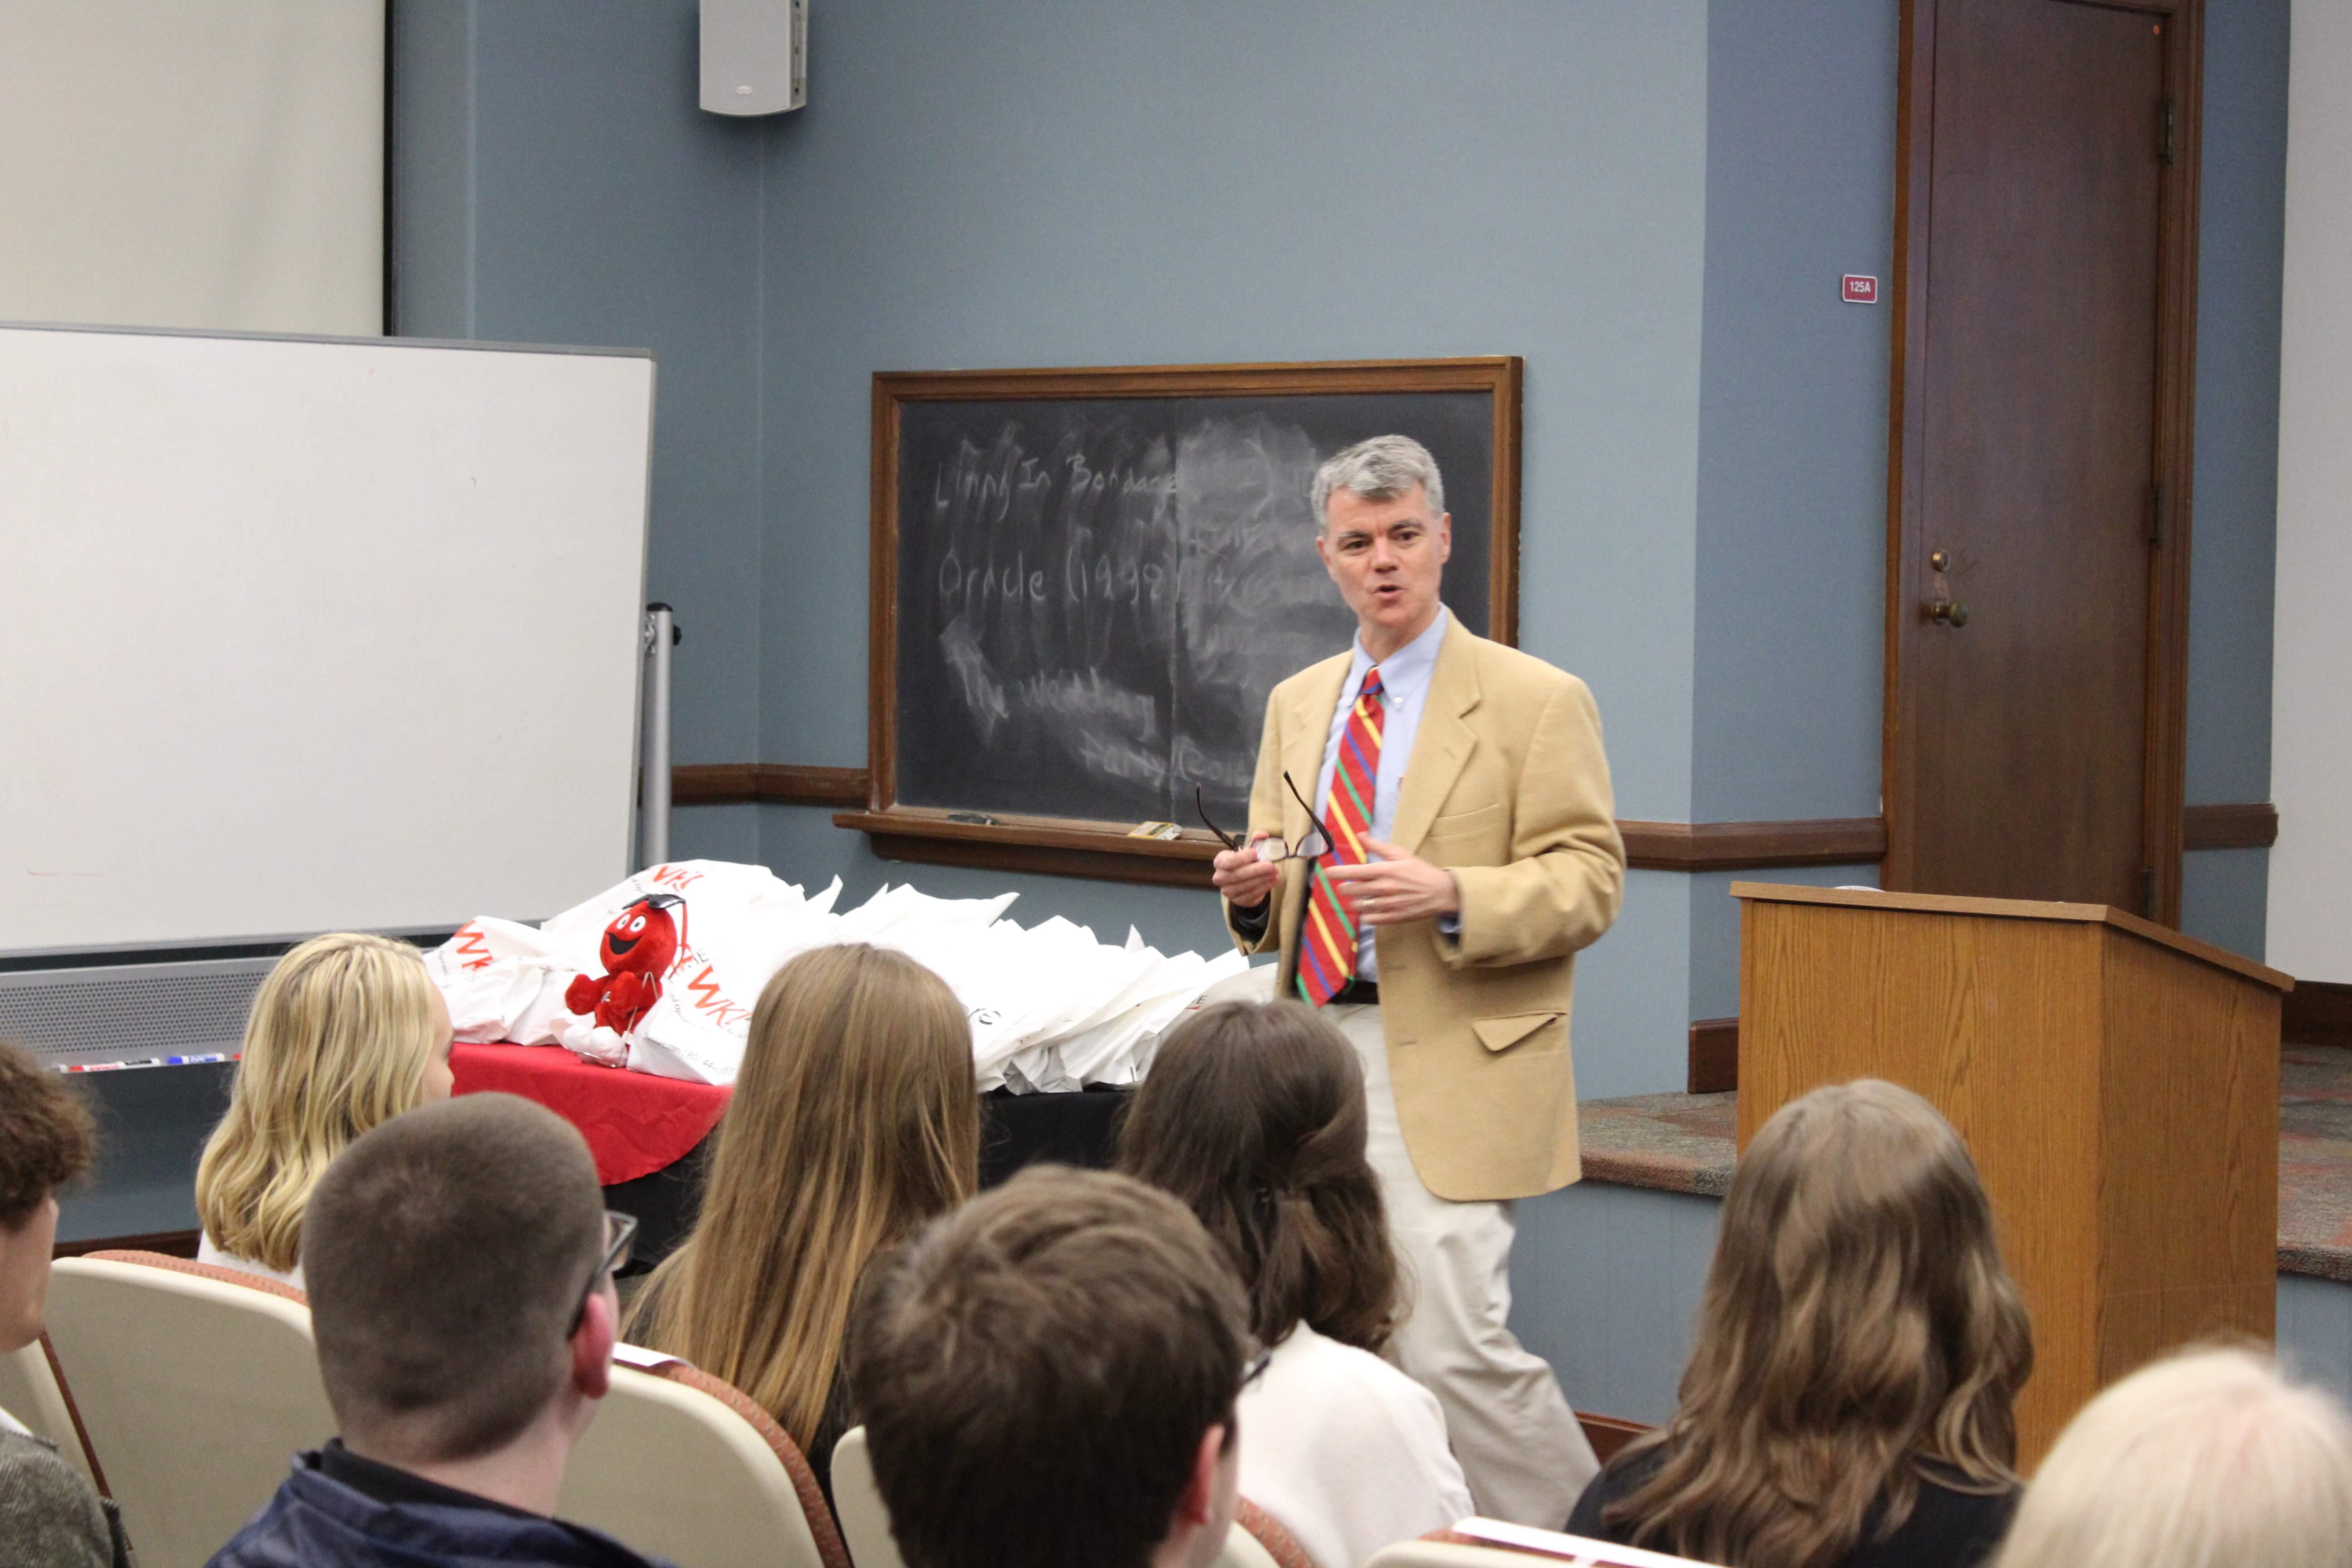 Department Head Dr. Hale speaking about the WKU English program